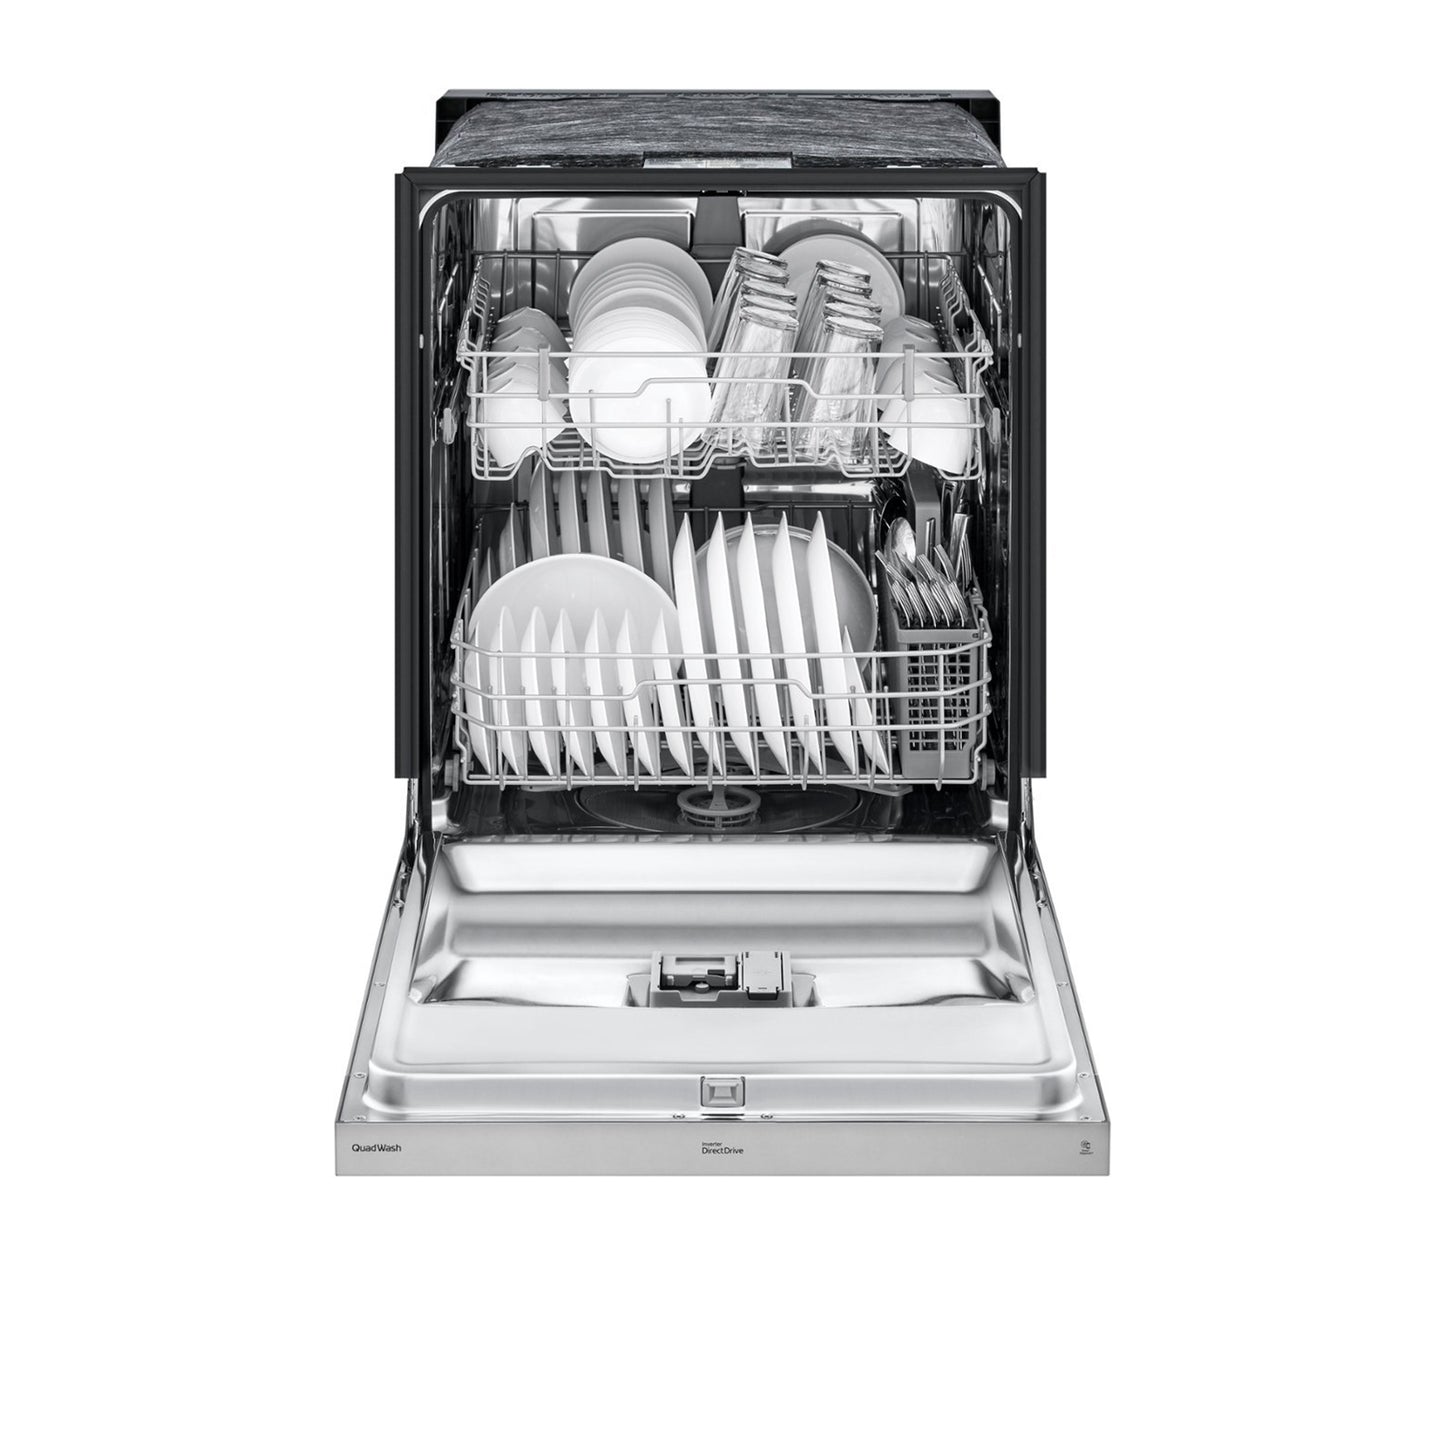 Front Control Dishwasher with QuadWash